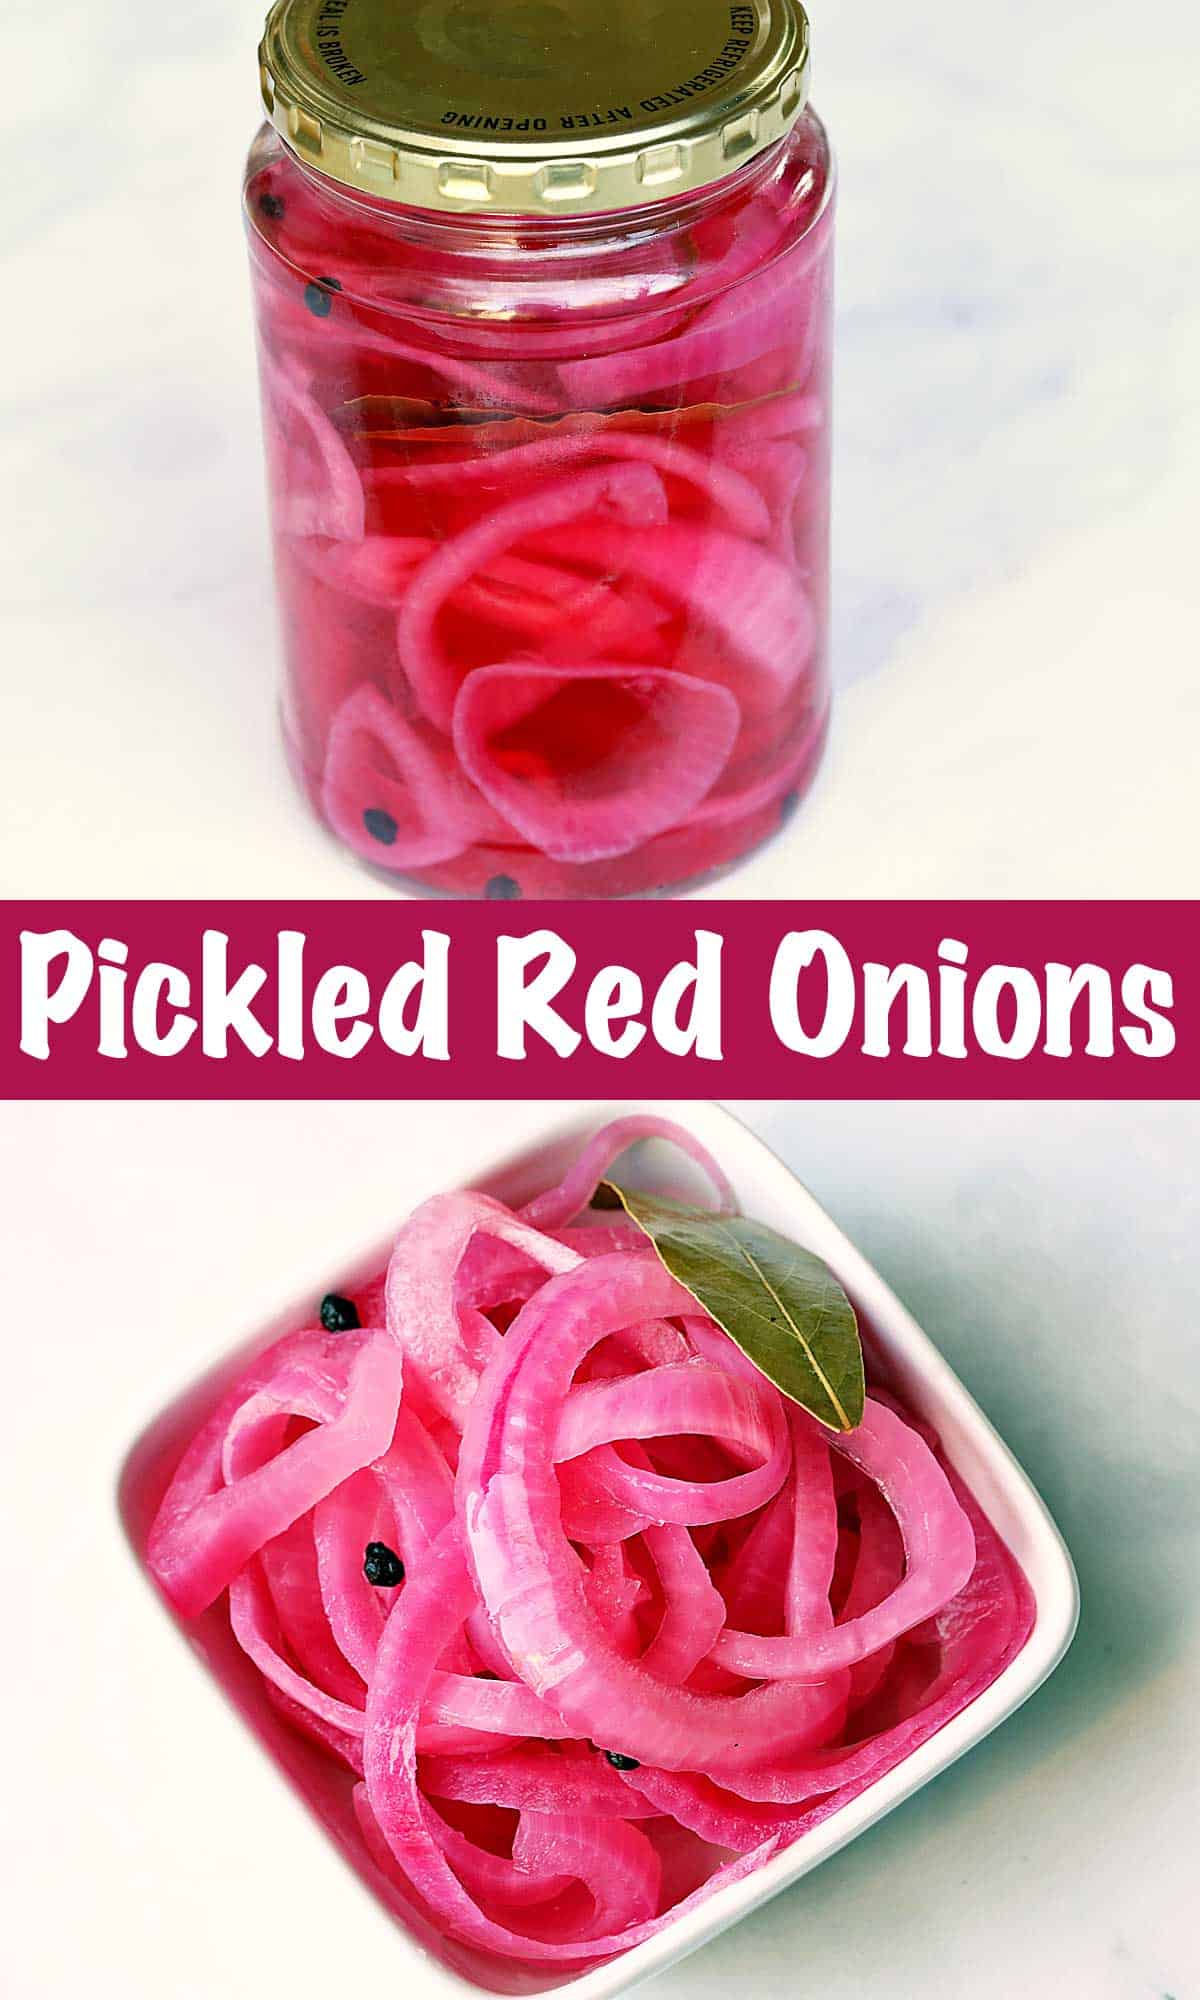 A two-photo collage of pickled red onions - in a jar and in a bowl.  